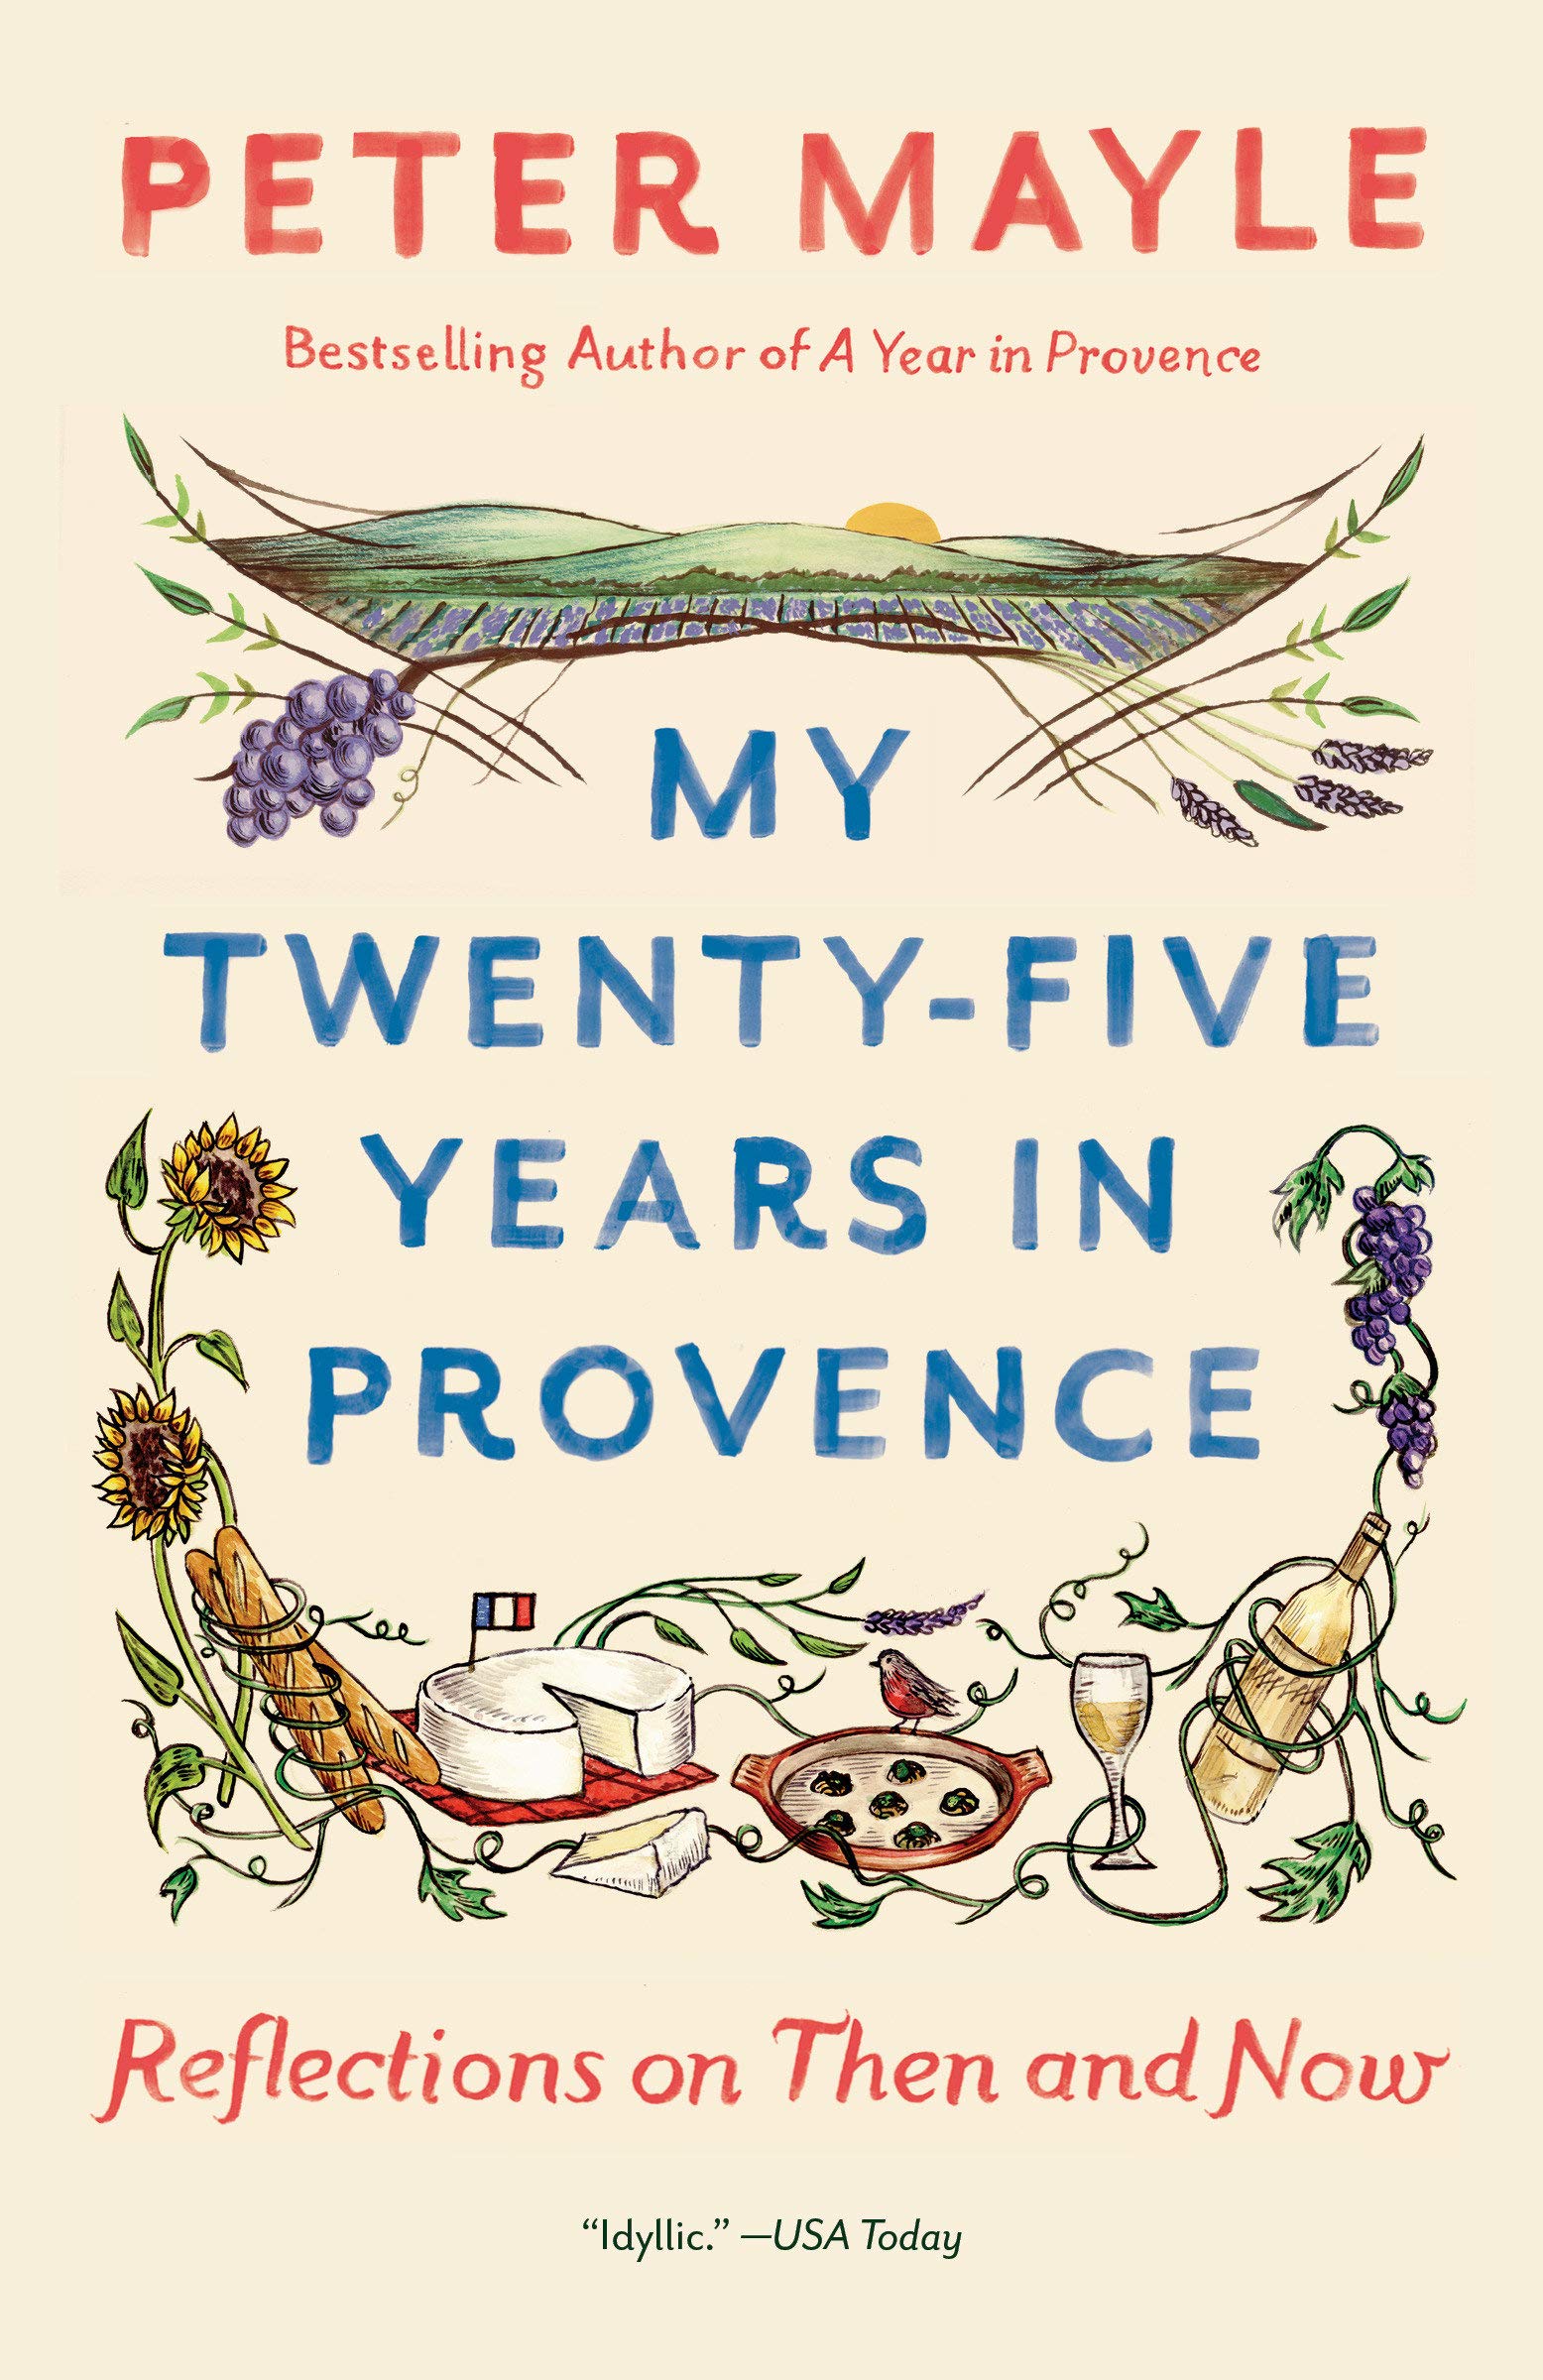 My Twenty-five Years in Provence: Reflections on Then and Now (Vintage Departures)